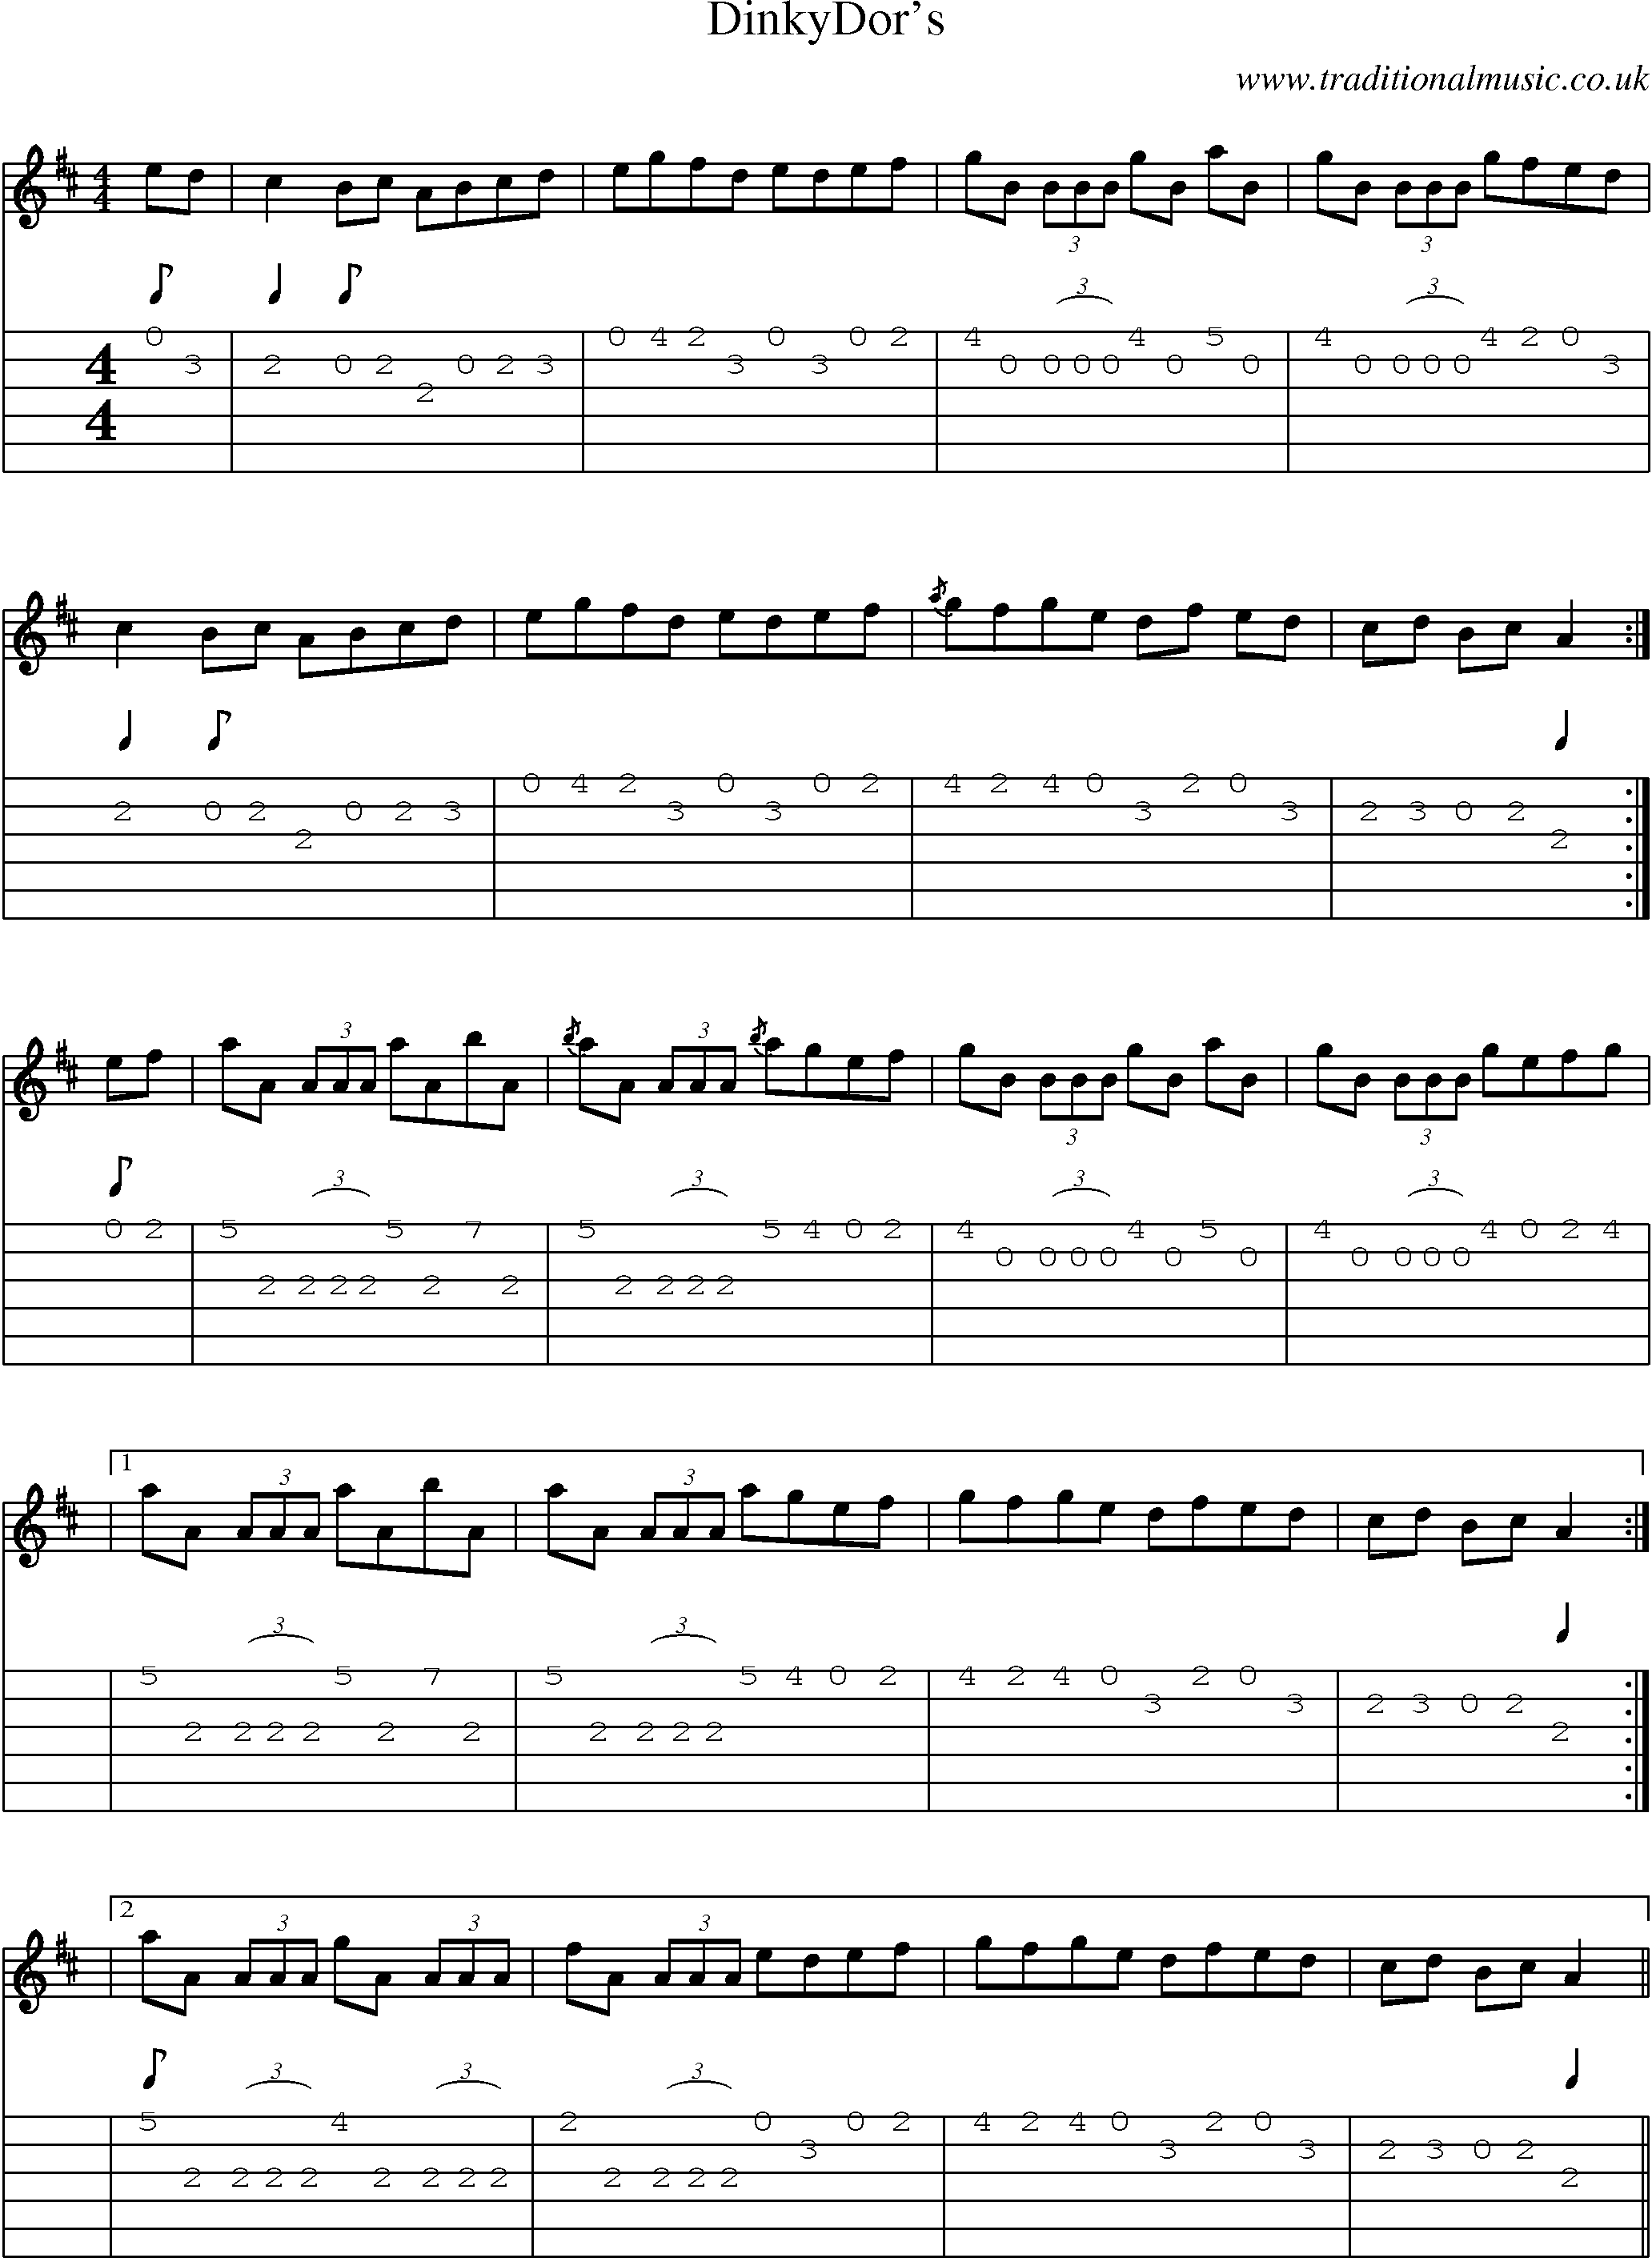 Music Score and Guitar Tabs for Dinkydors